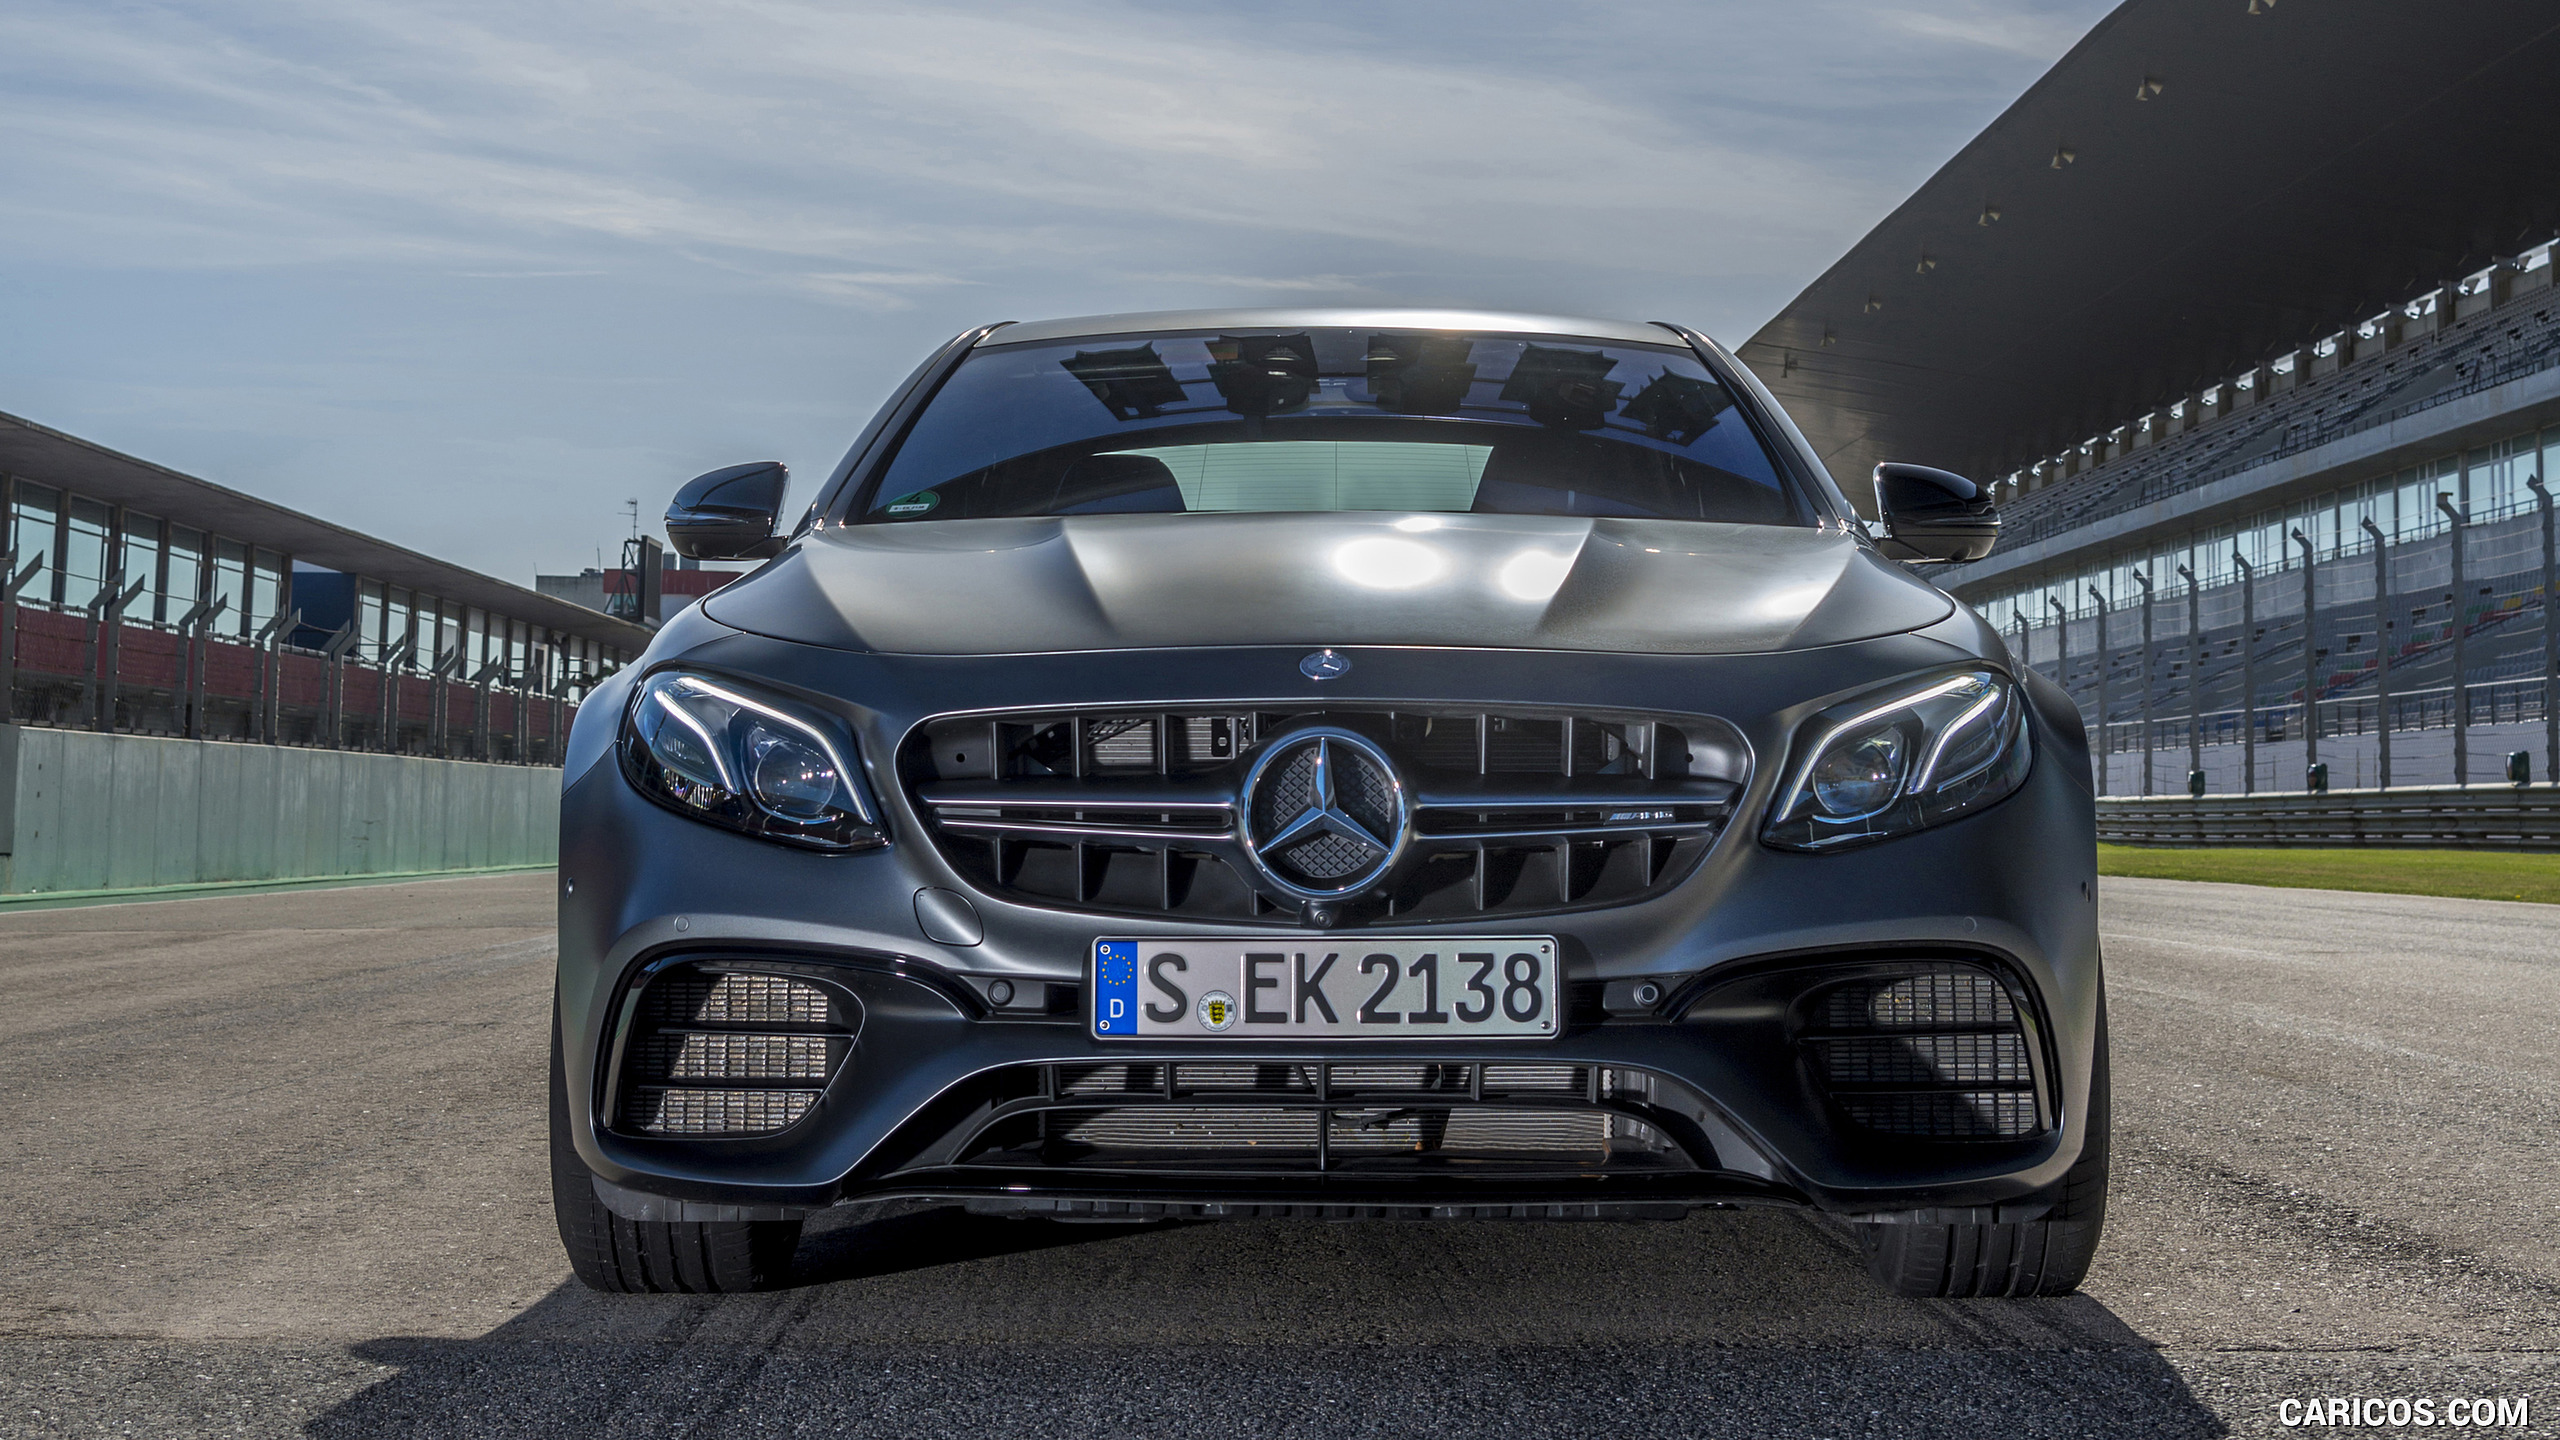 2018 Mercedes-AMG E63 S 4MATIC+ - Front, #275 of 323